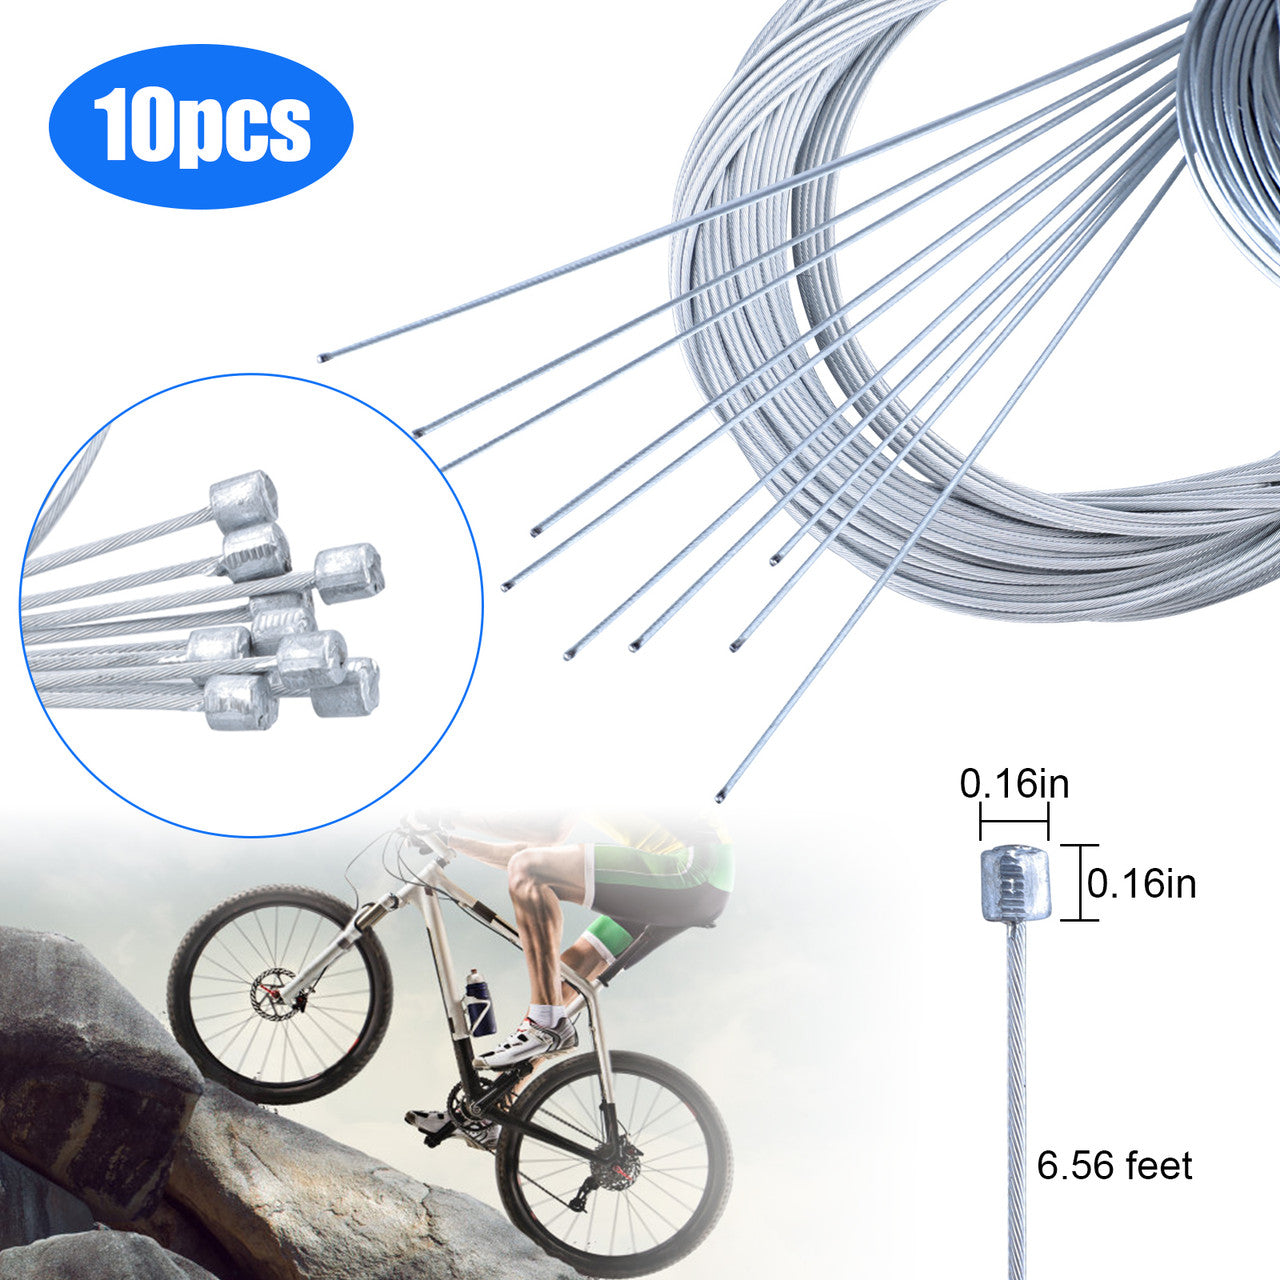 6.6ft Bicycle Shifter Cable Set, Universal Brake and Derailleur Cable Repair Set Silver Road Bicycle Shift Cable Set For Most Types of Bikes MTB Bicycle or Road Bikes, 10PCS